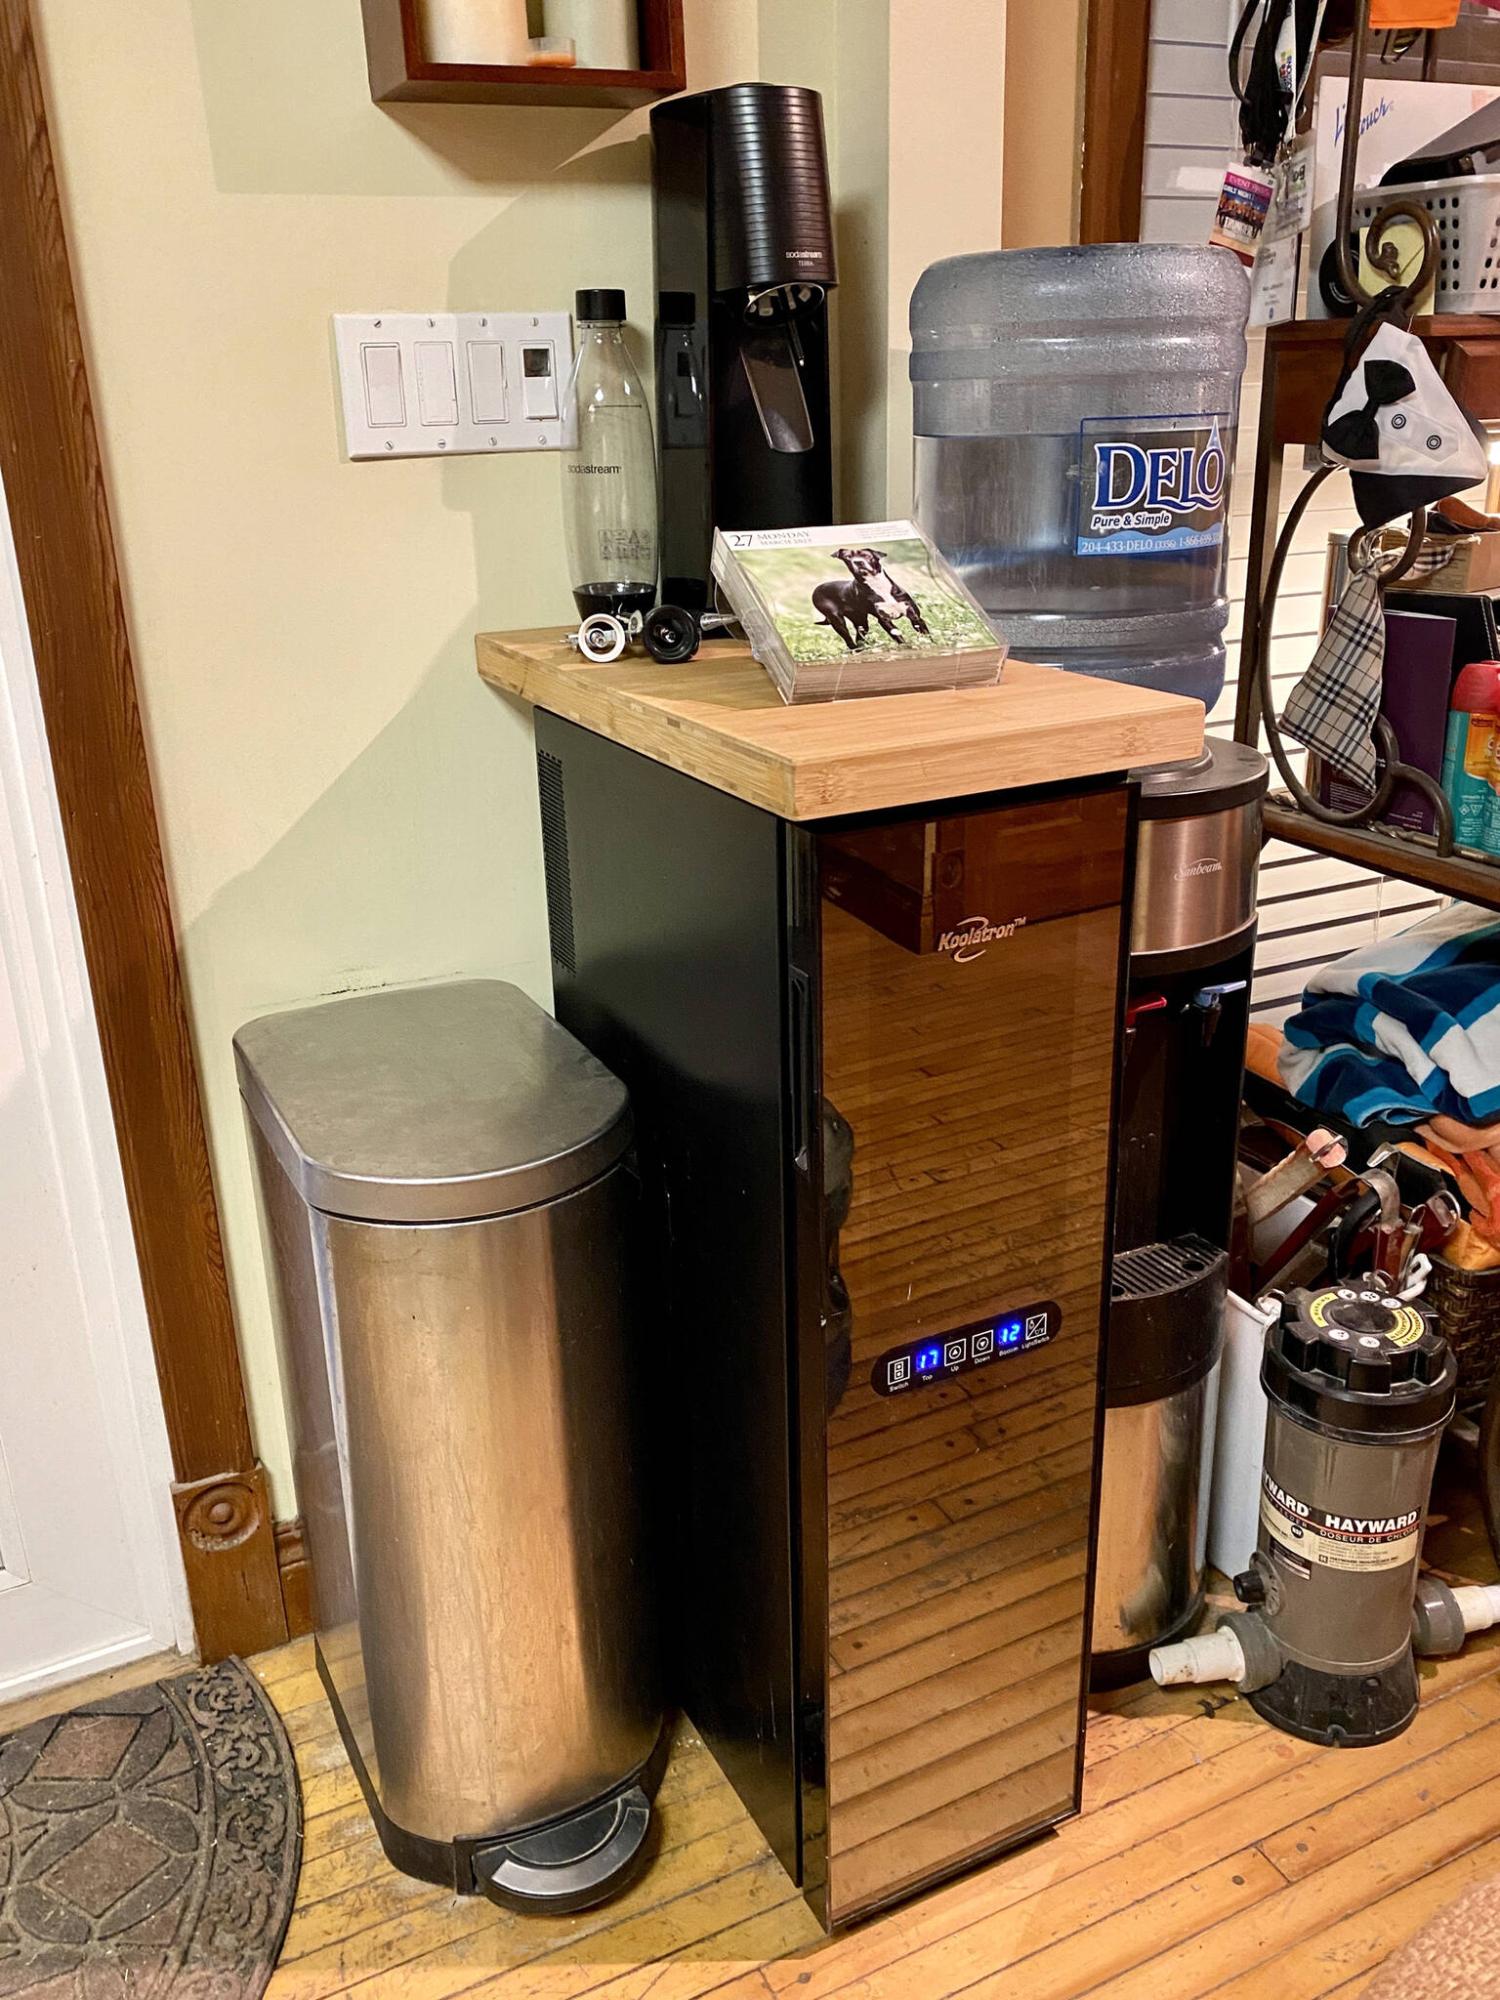  <p>Photos by Marc LaBossiere / Winnipeg Free Press</p>
                                <p>After a power outage fried the old wine cooler circuitry, a new wine cooler was installed and fitted with a bamboo countertop cut from remnants of a previous project.</p> 